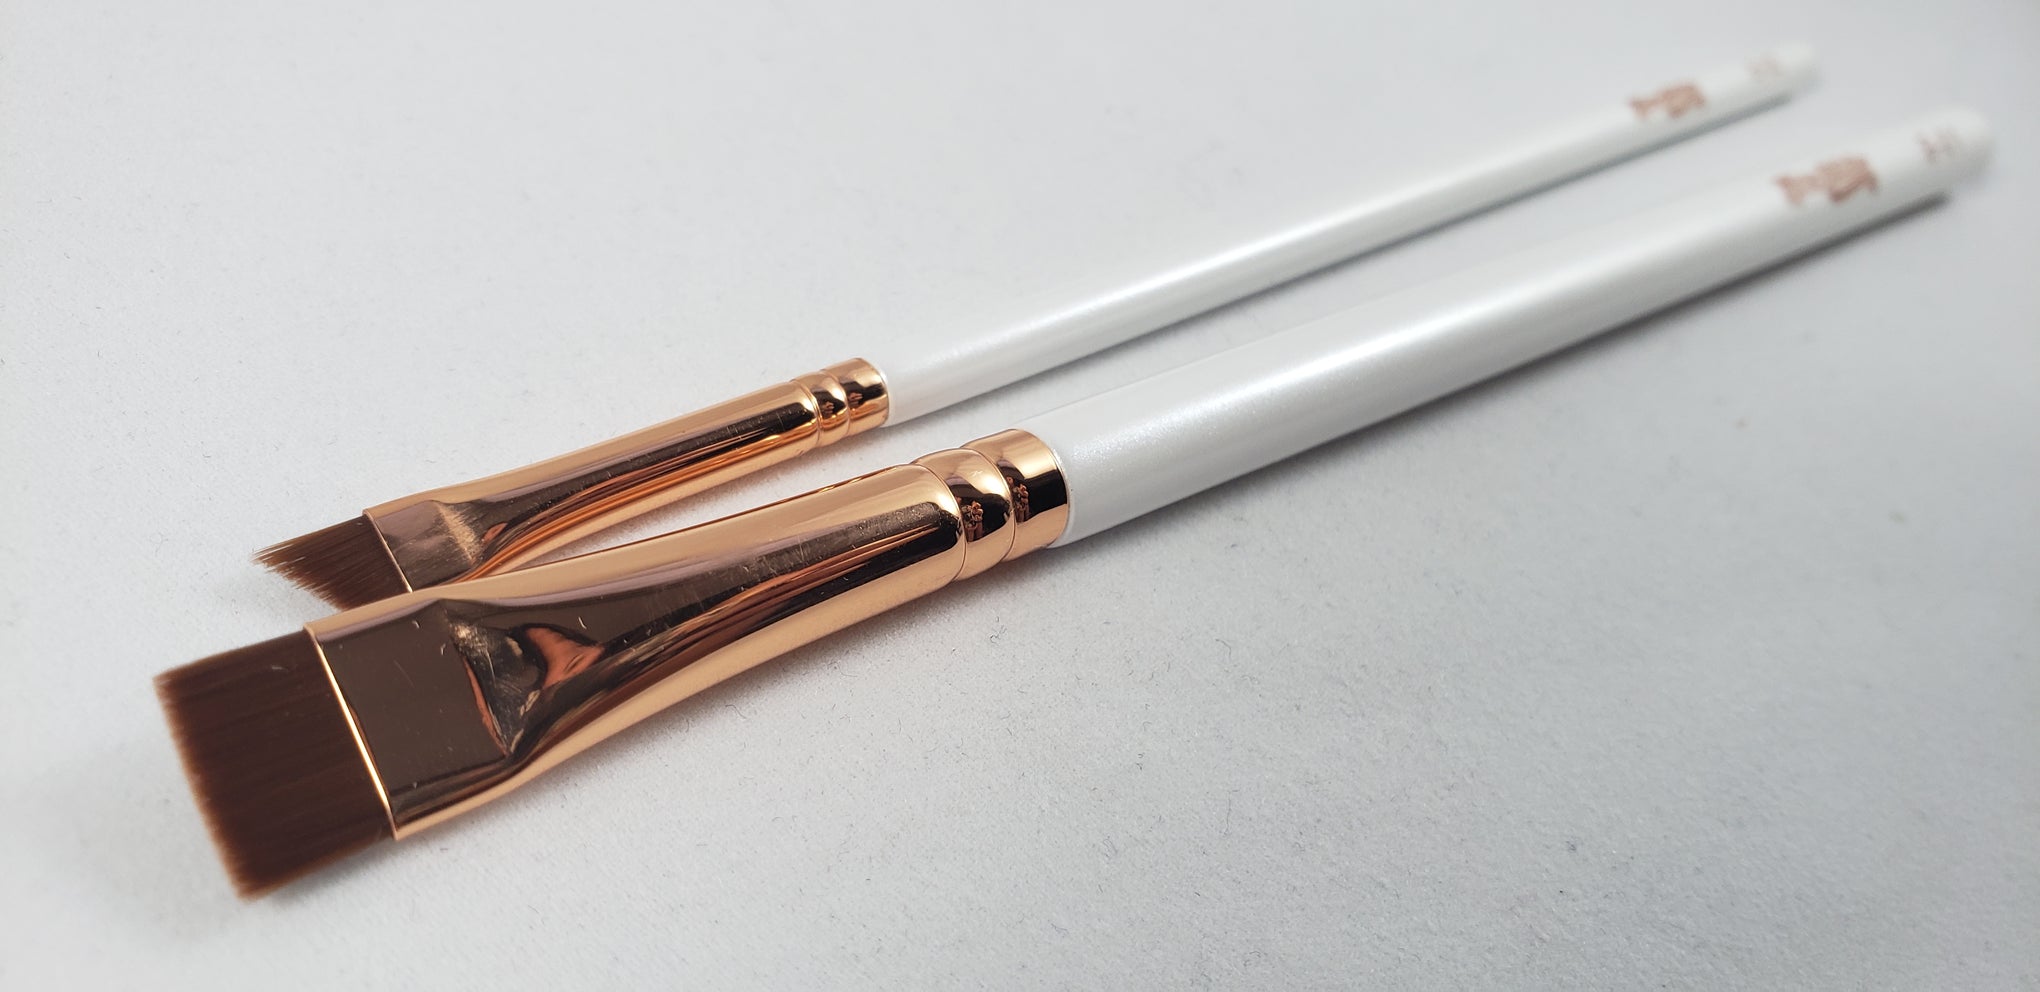 MicroArtistry Mapping Pen White or Pink! (New!) – MicroArtistry Academy  Brow Lamination Supply